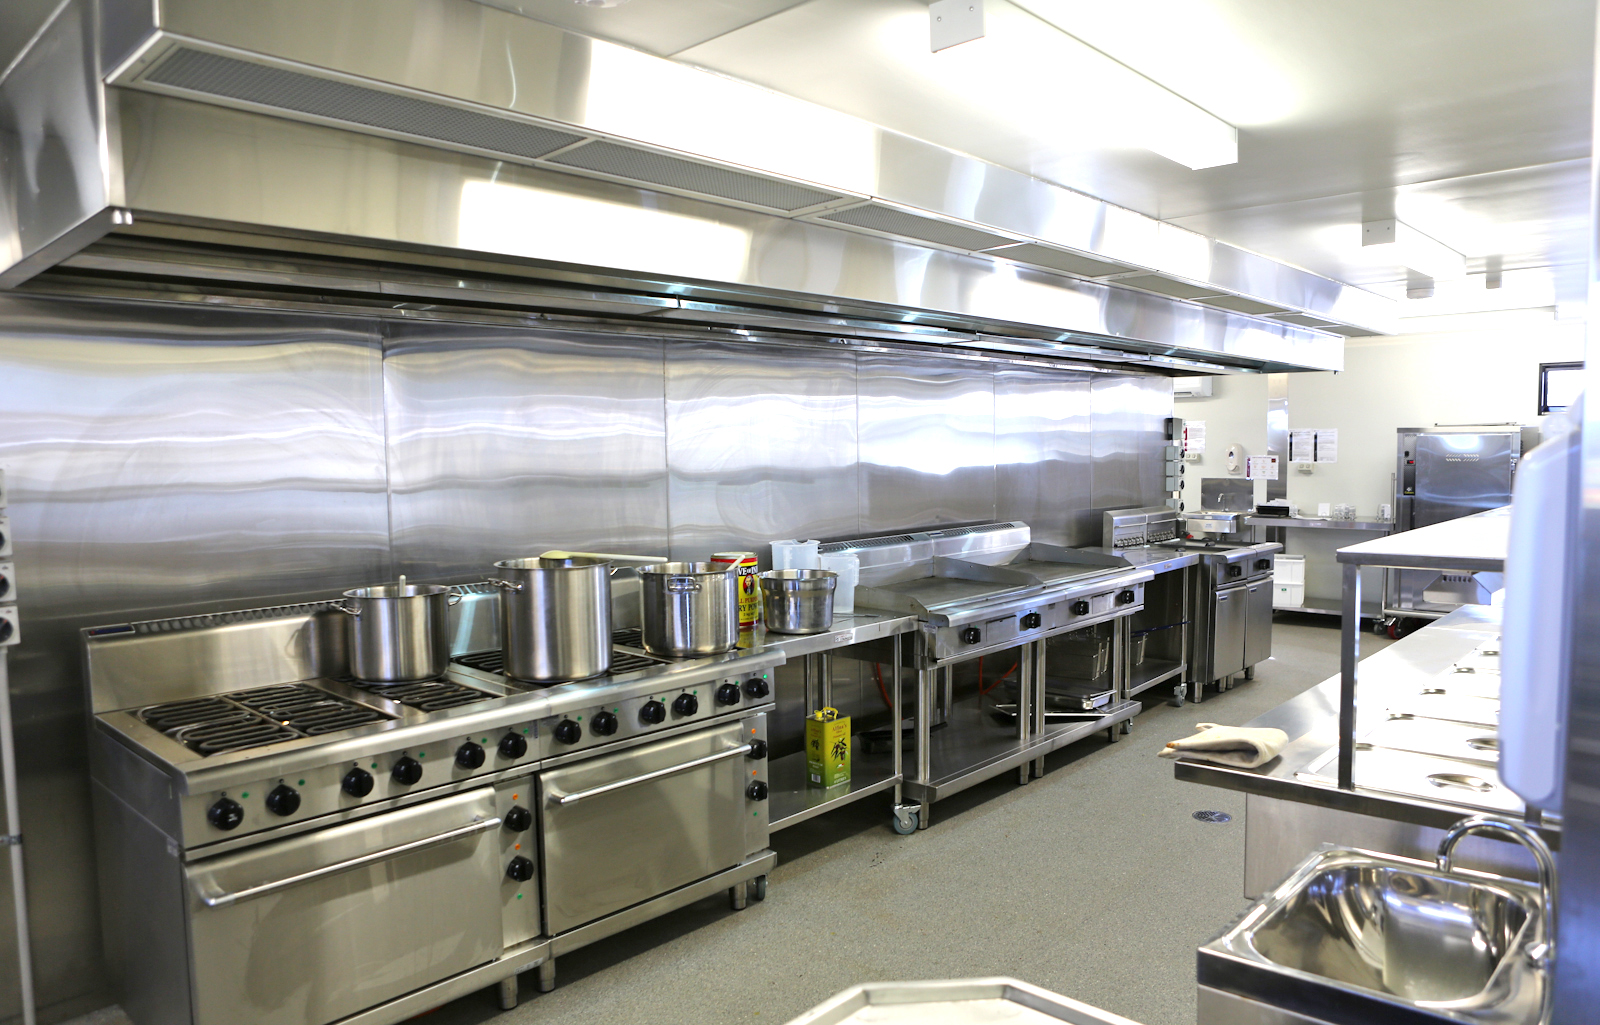 Portable Site Kitchens Diners Ausco Modular